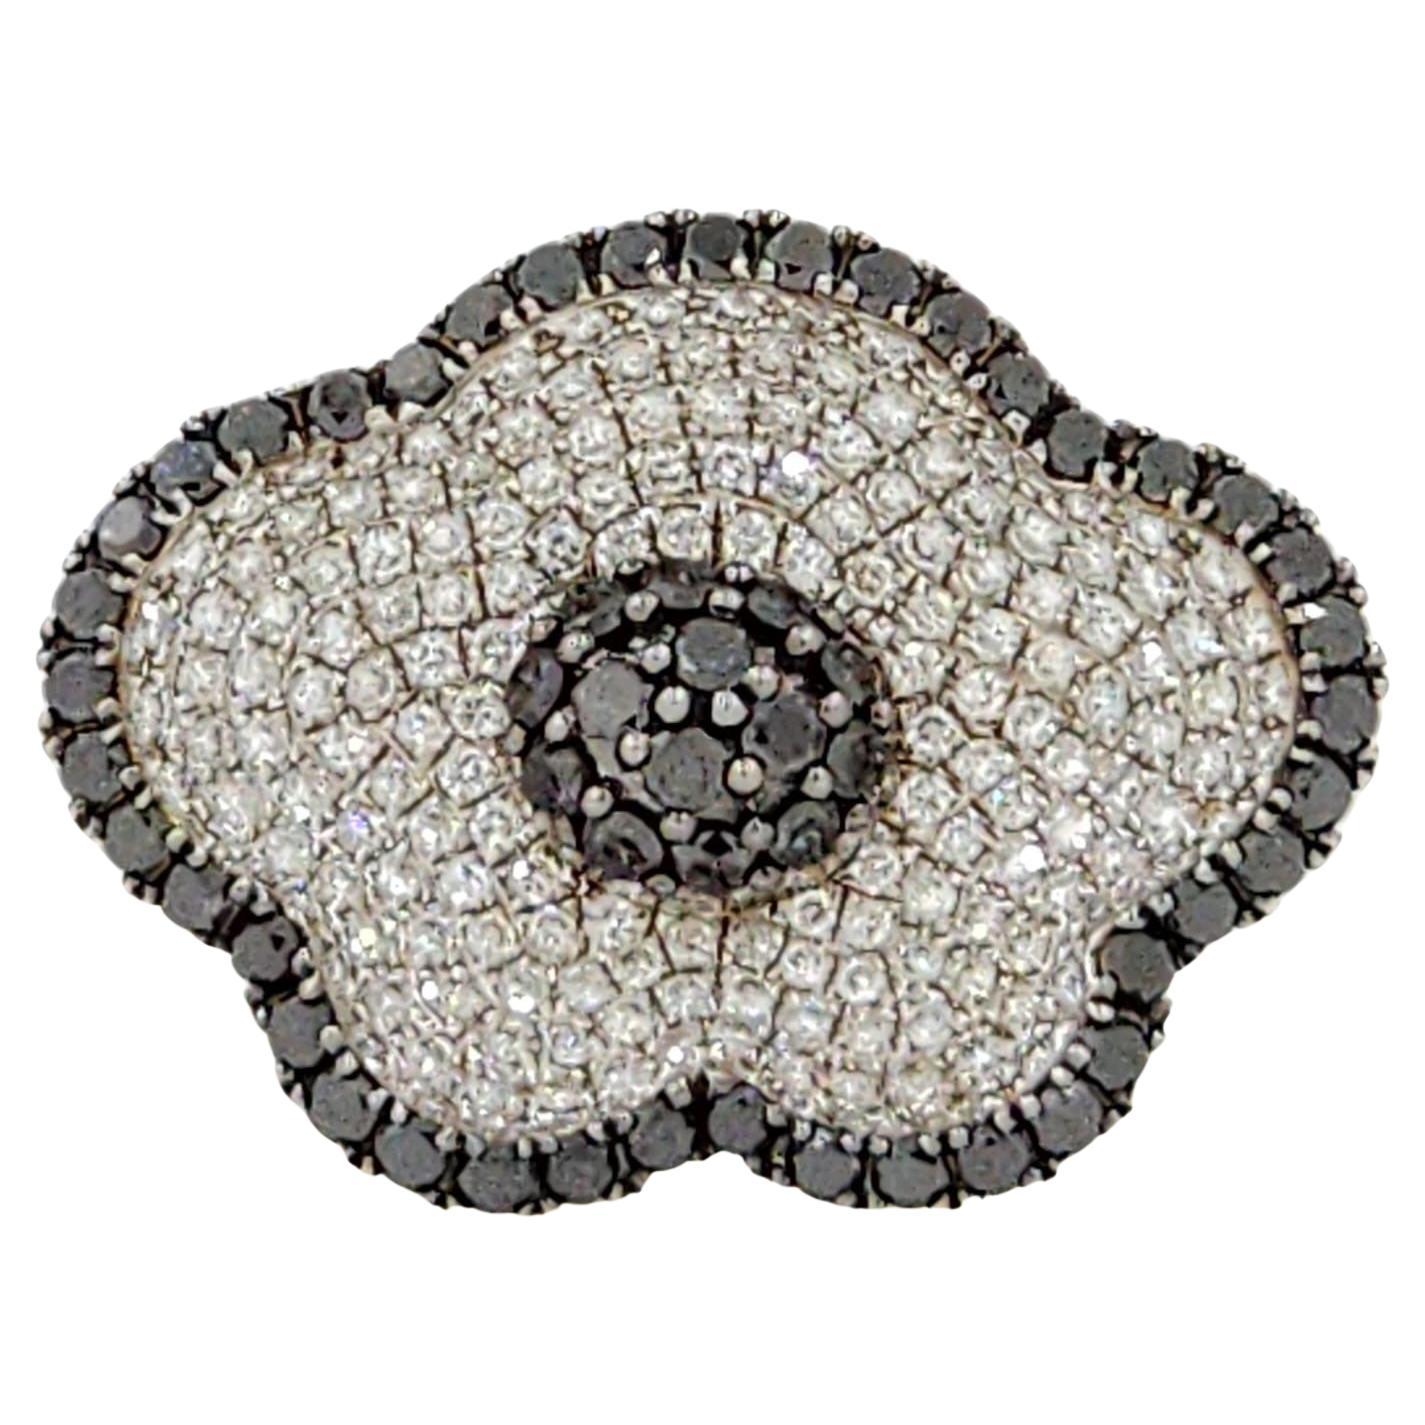 Introducing our Vintage Diamond Black Diamonds Flower Cluster Ring in 18K White and Rhodium Gold, a mesmerizing piece that combines the beauty of white and black diamonds in a stunning floral cluster design. This vintage-inspired ring is a true